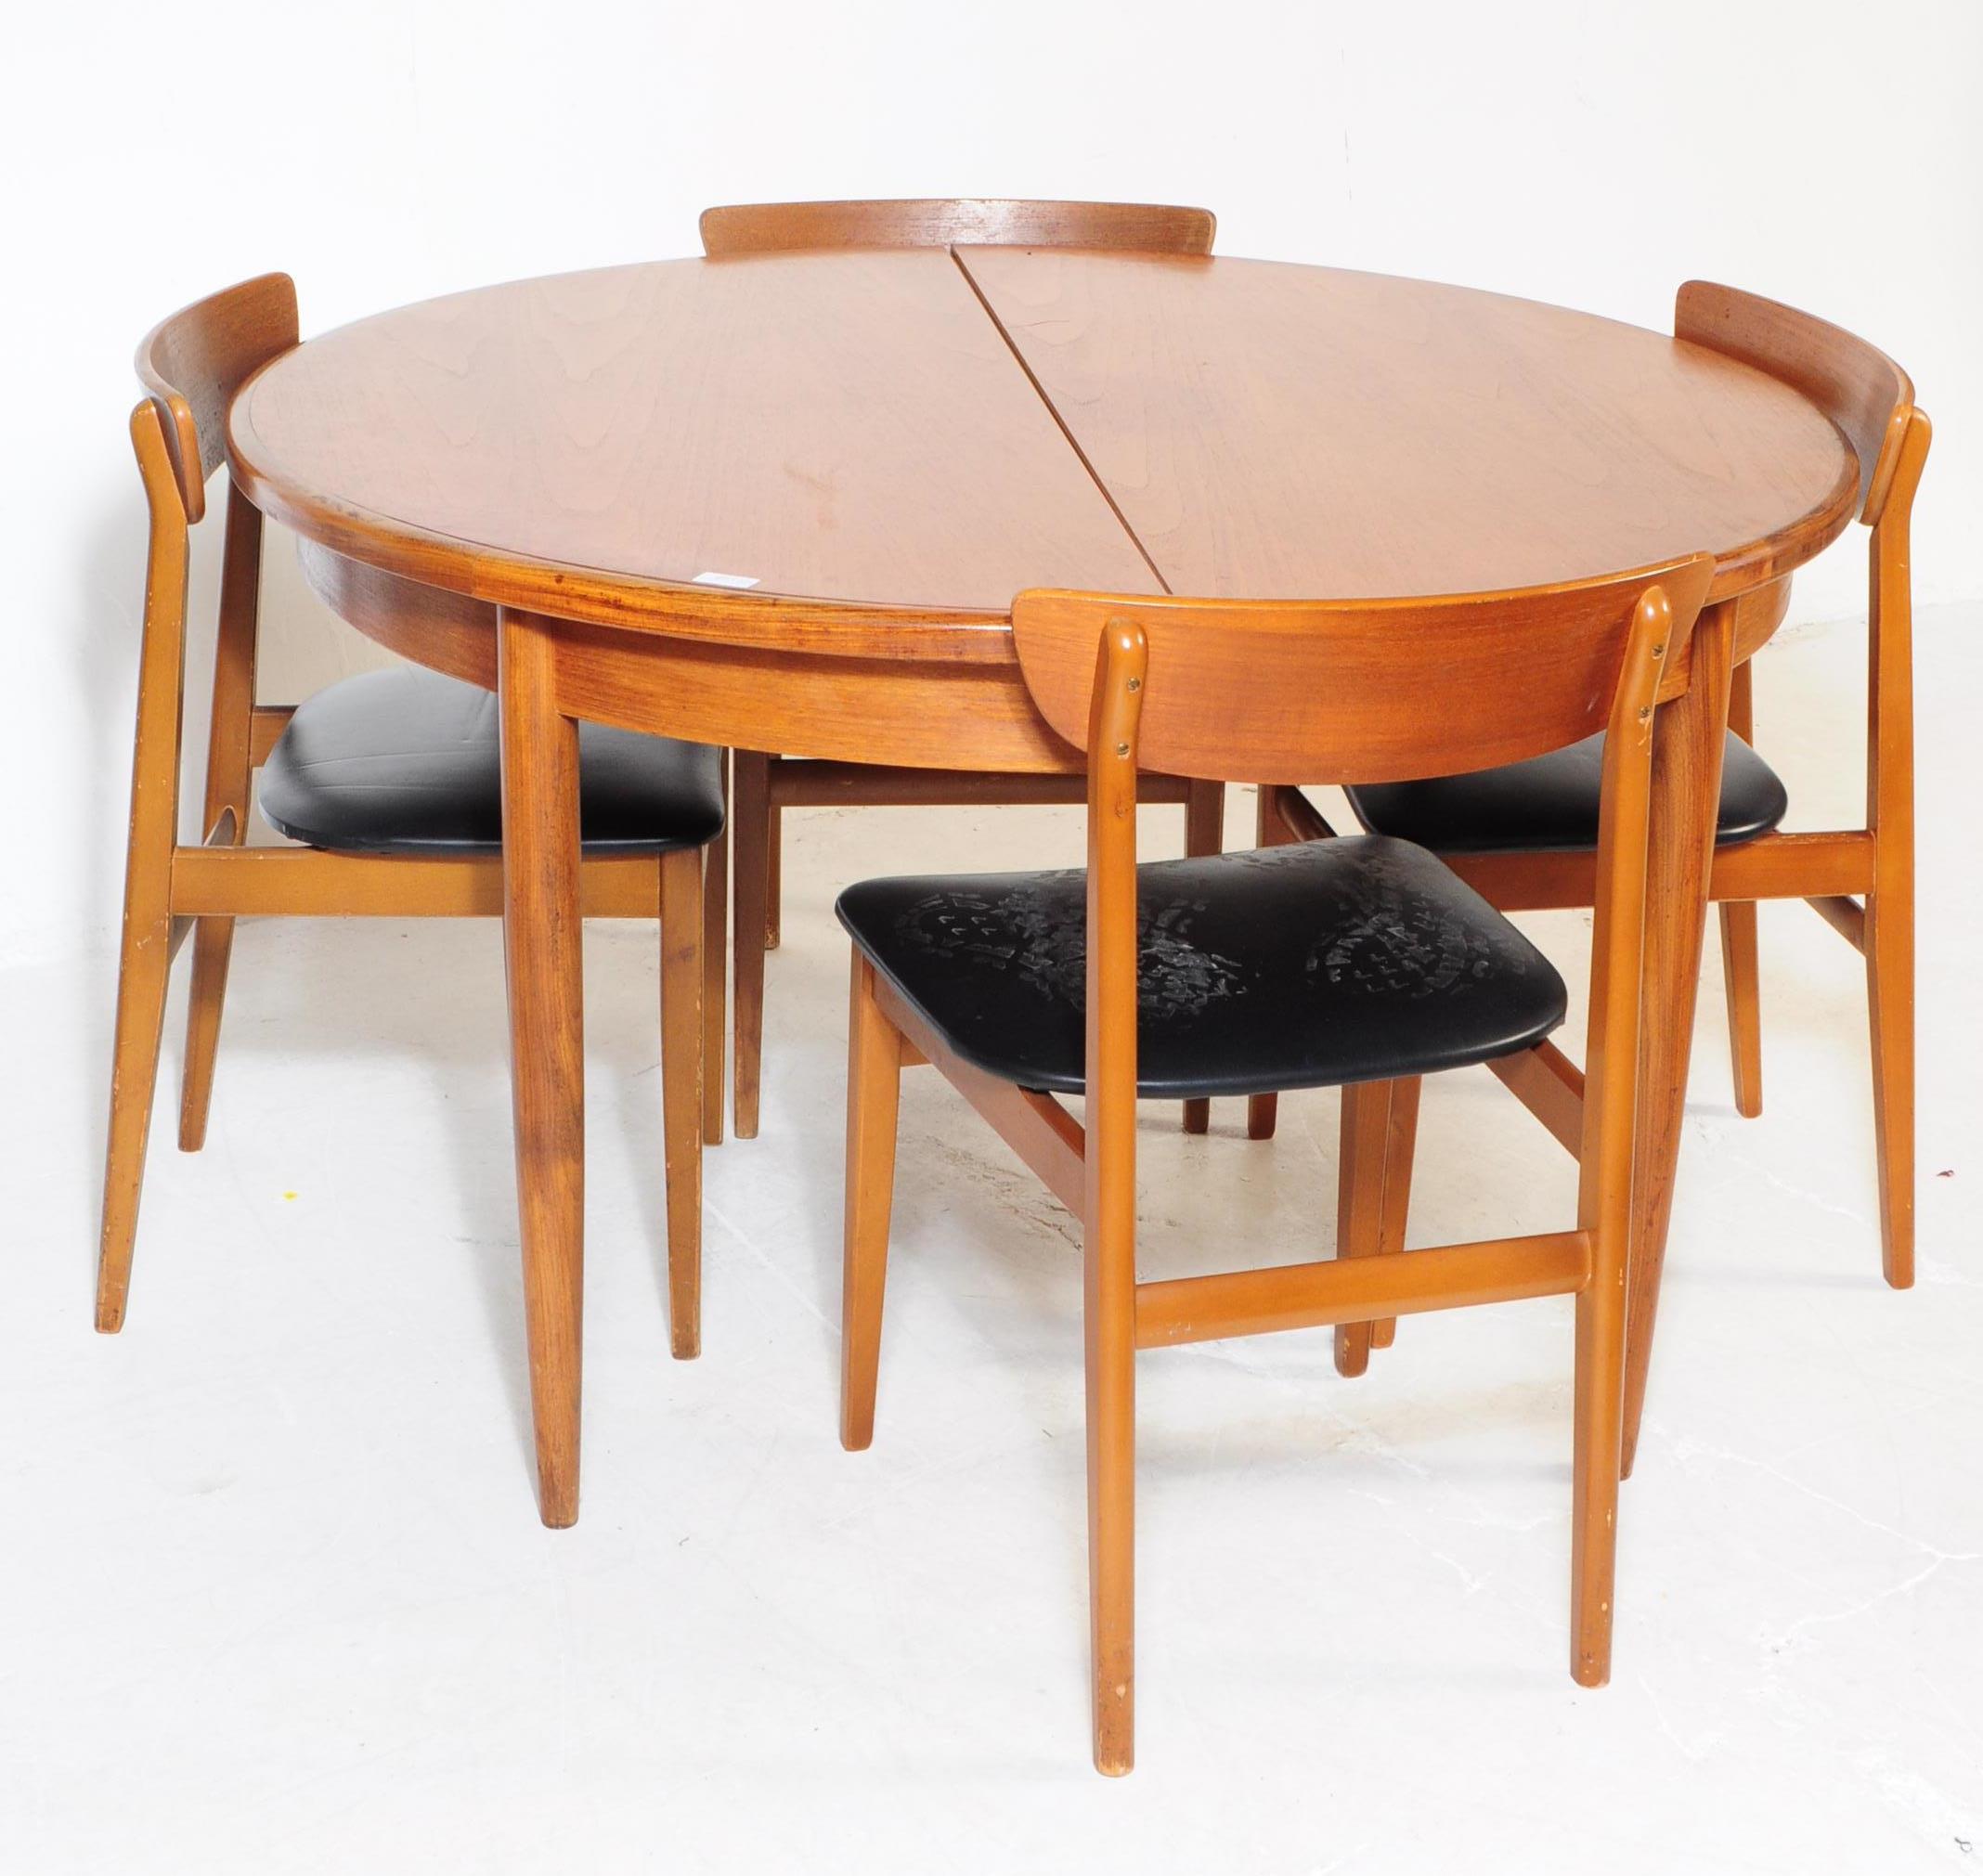 G-PLAN - FRESCO - MID CENTURY DINING TABLE & CHAIRS